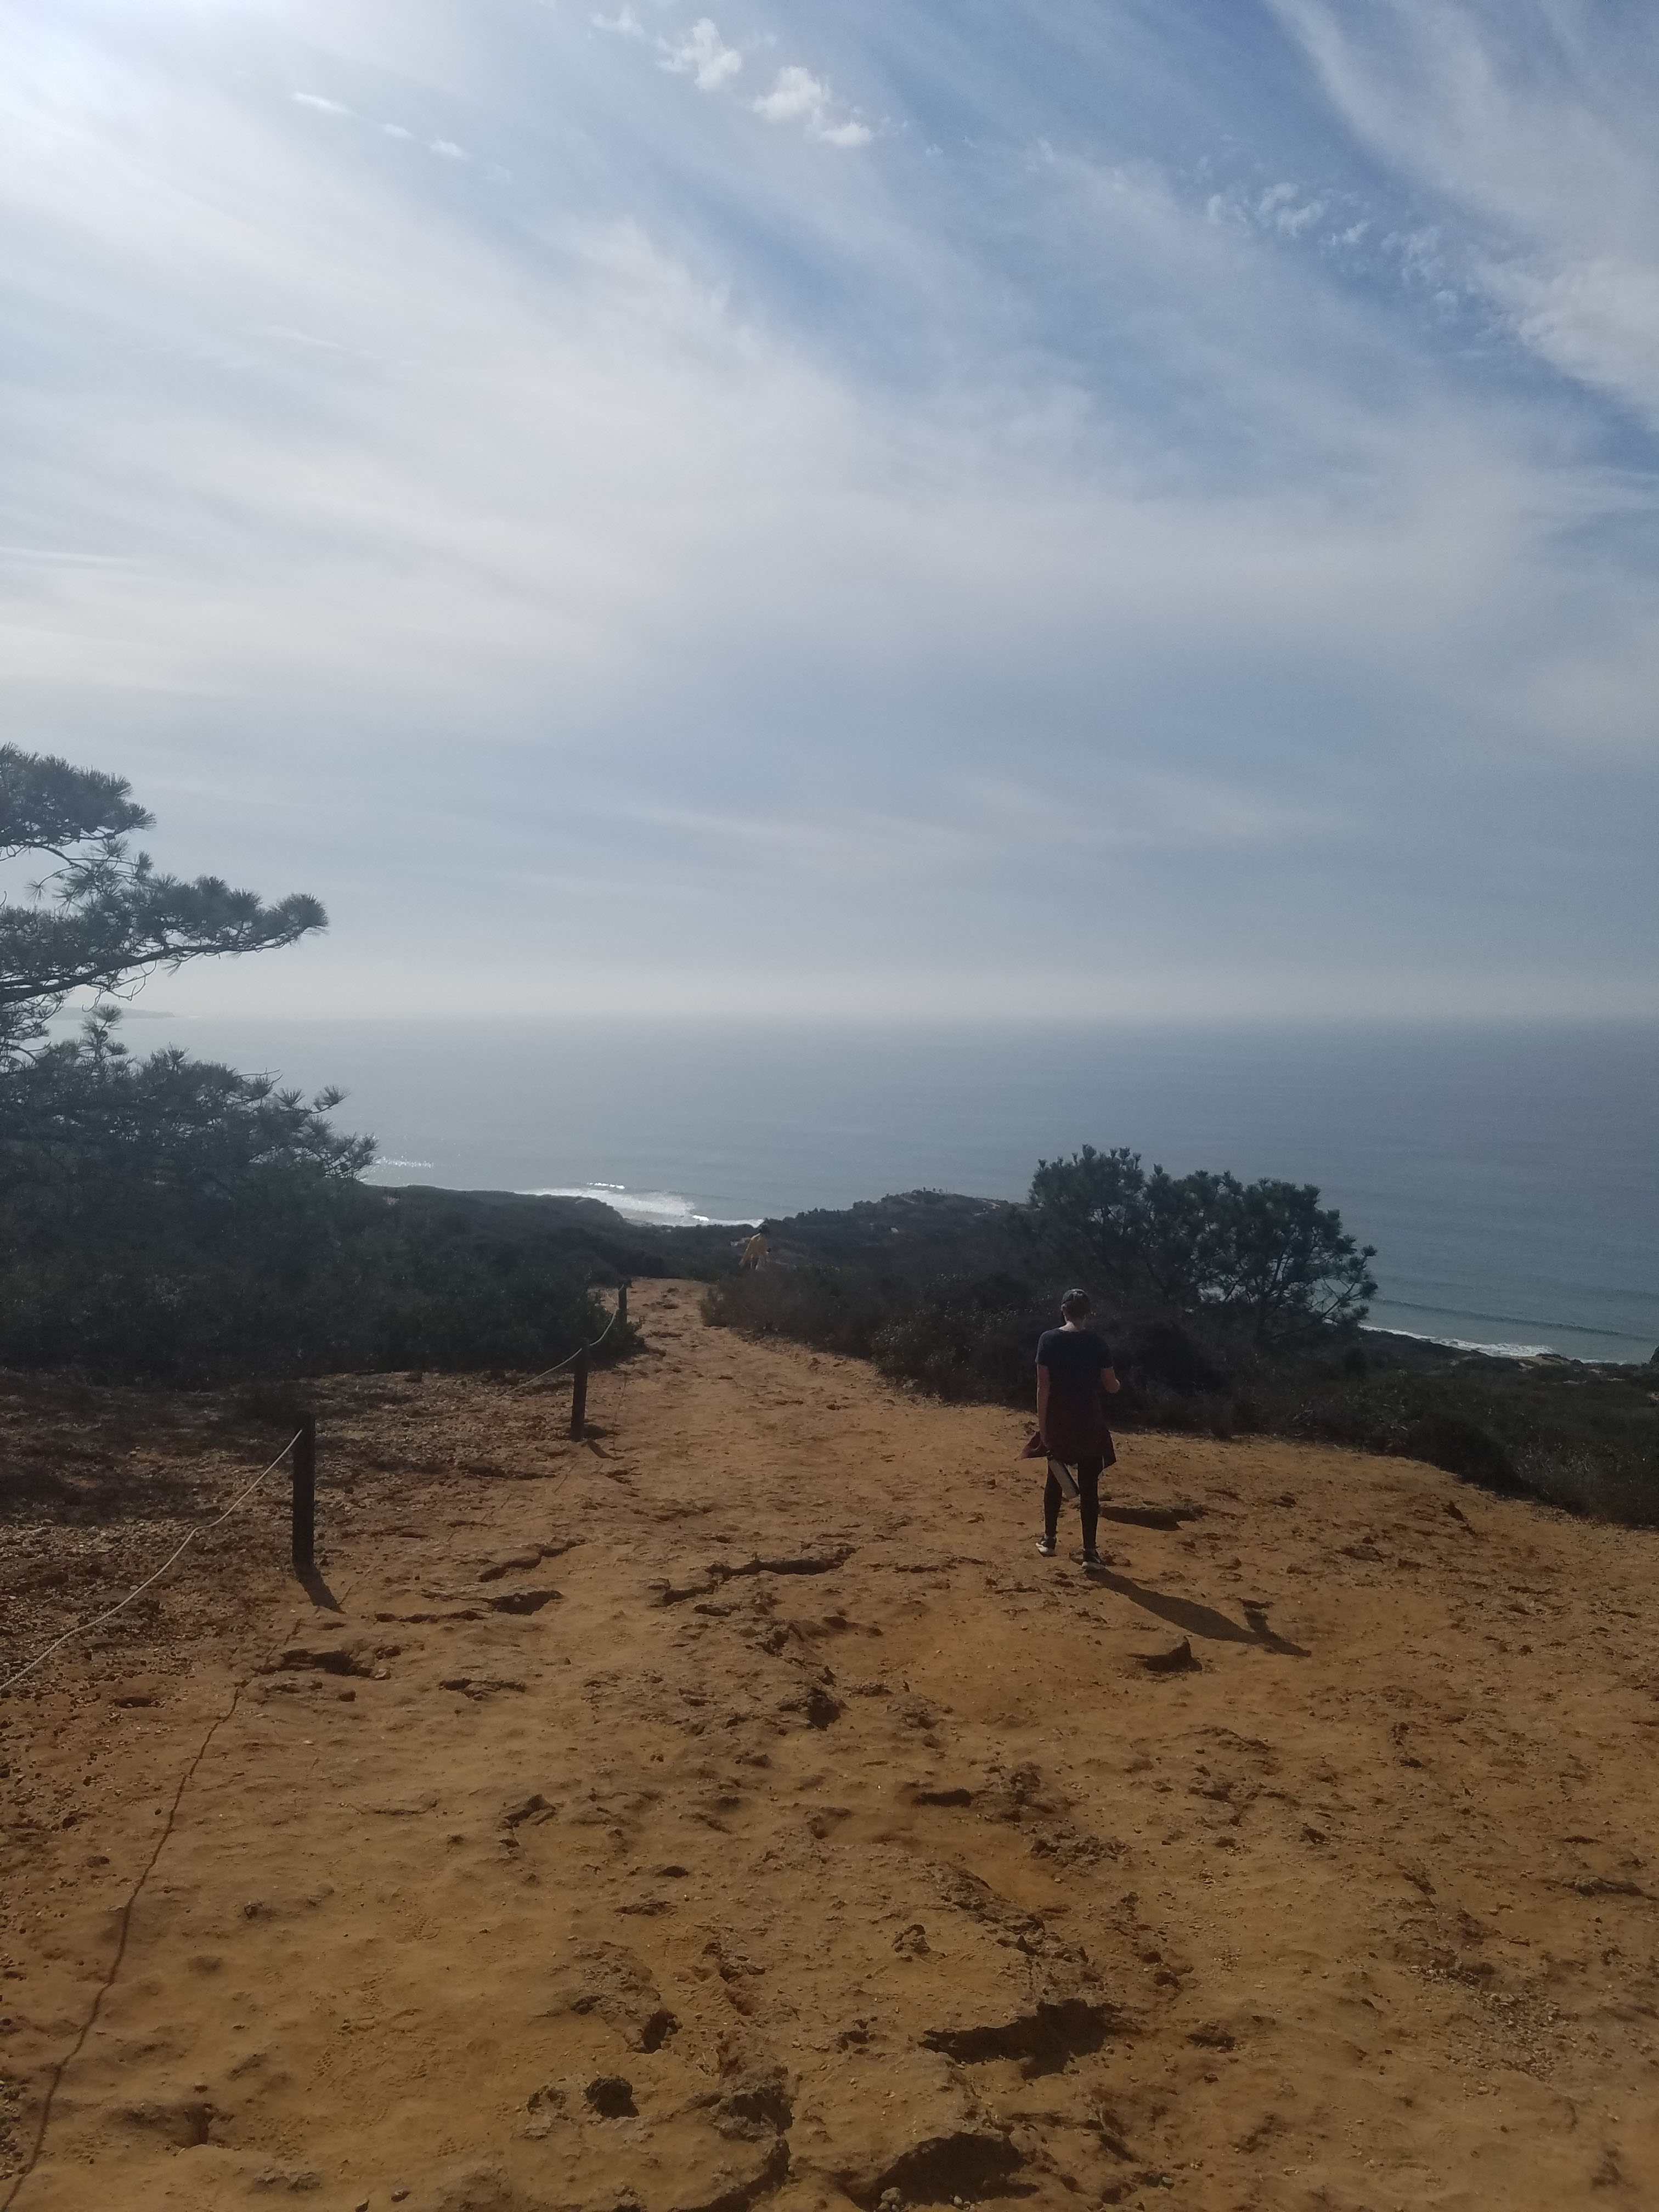 Red Butte, Razor Point Trail, and Yucca Point Trail